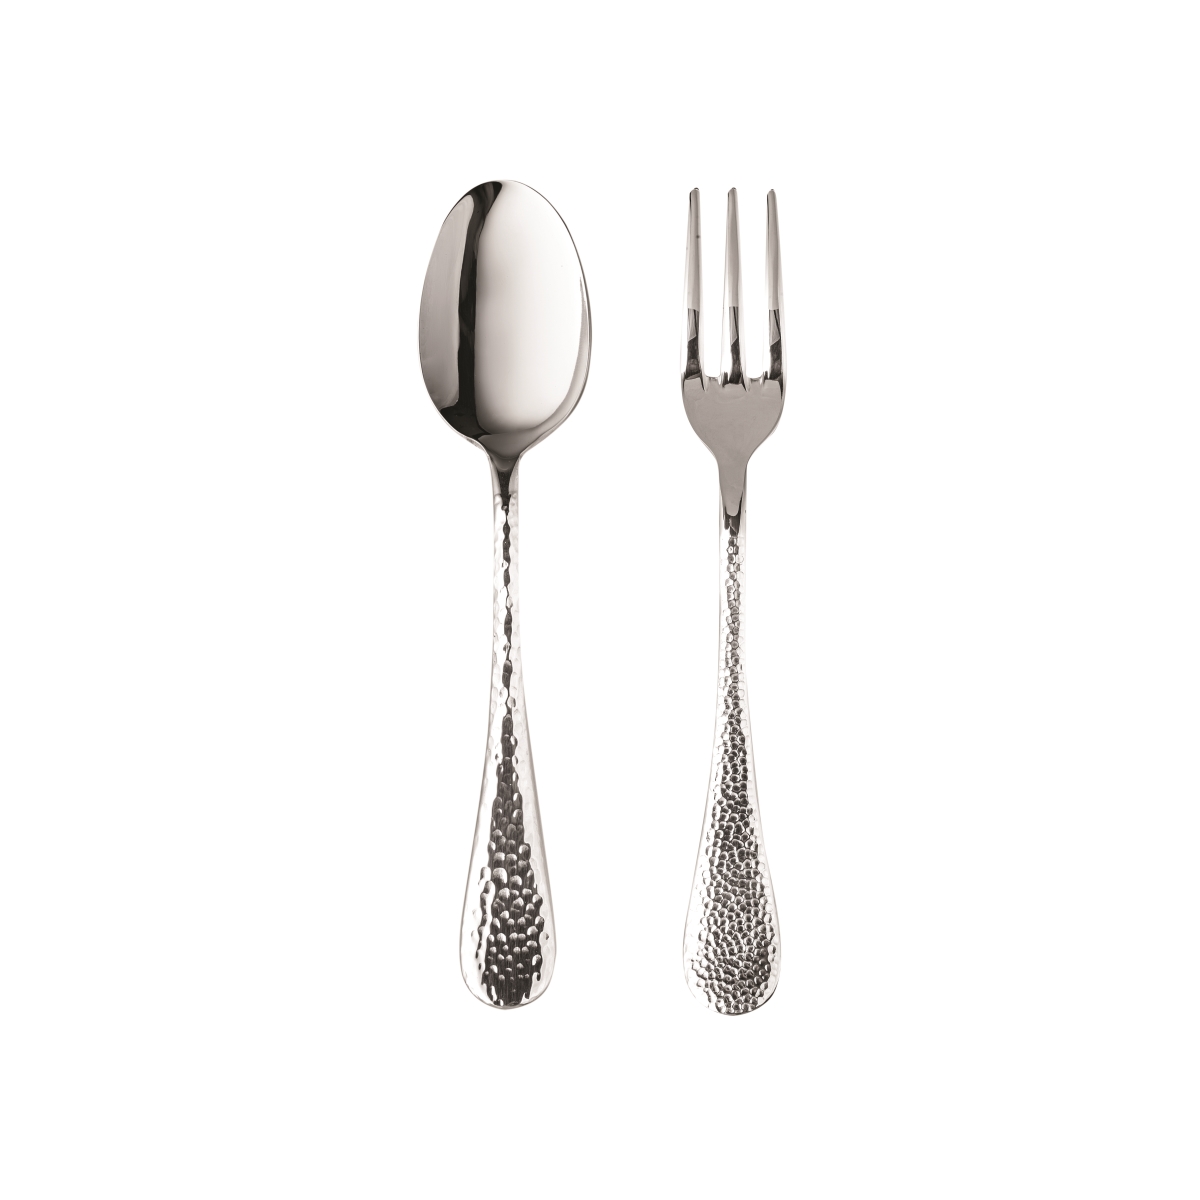 Mepra Serving Set (Fork and Spoon) EPOQUE